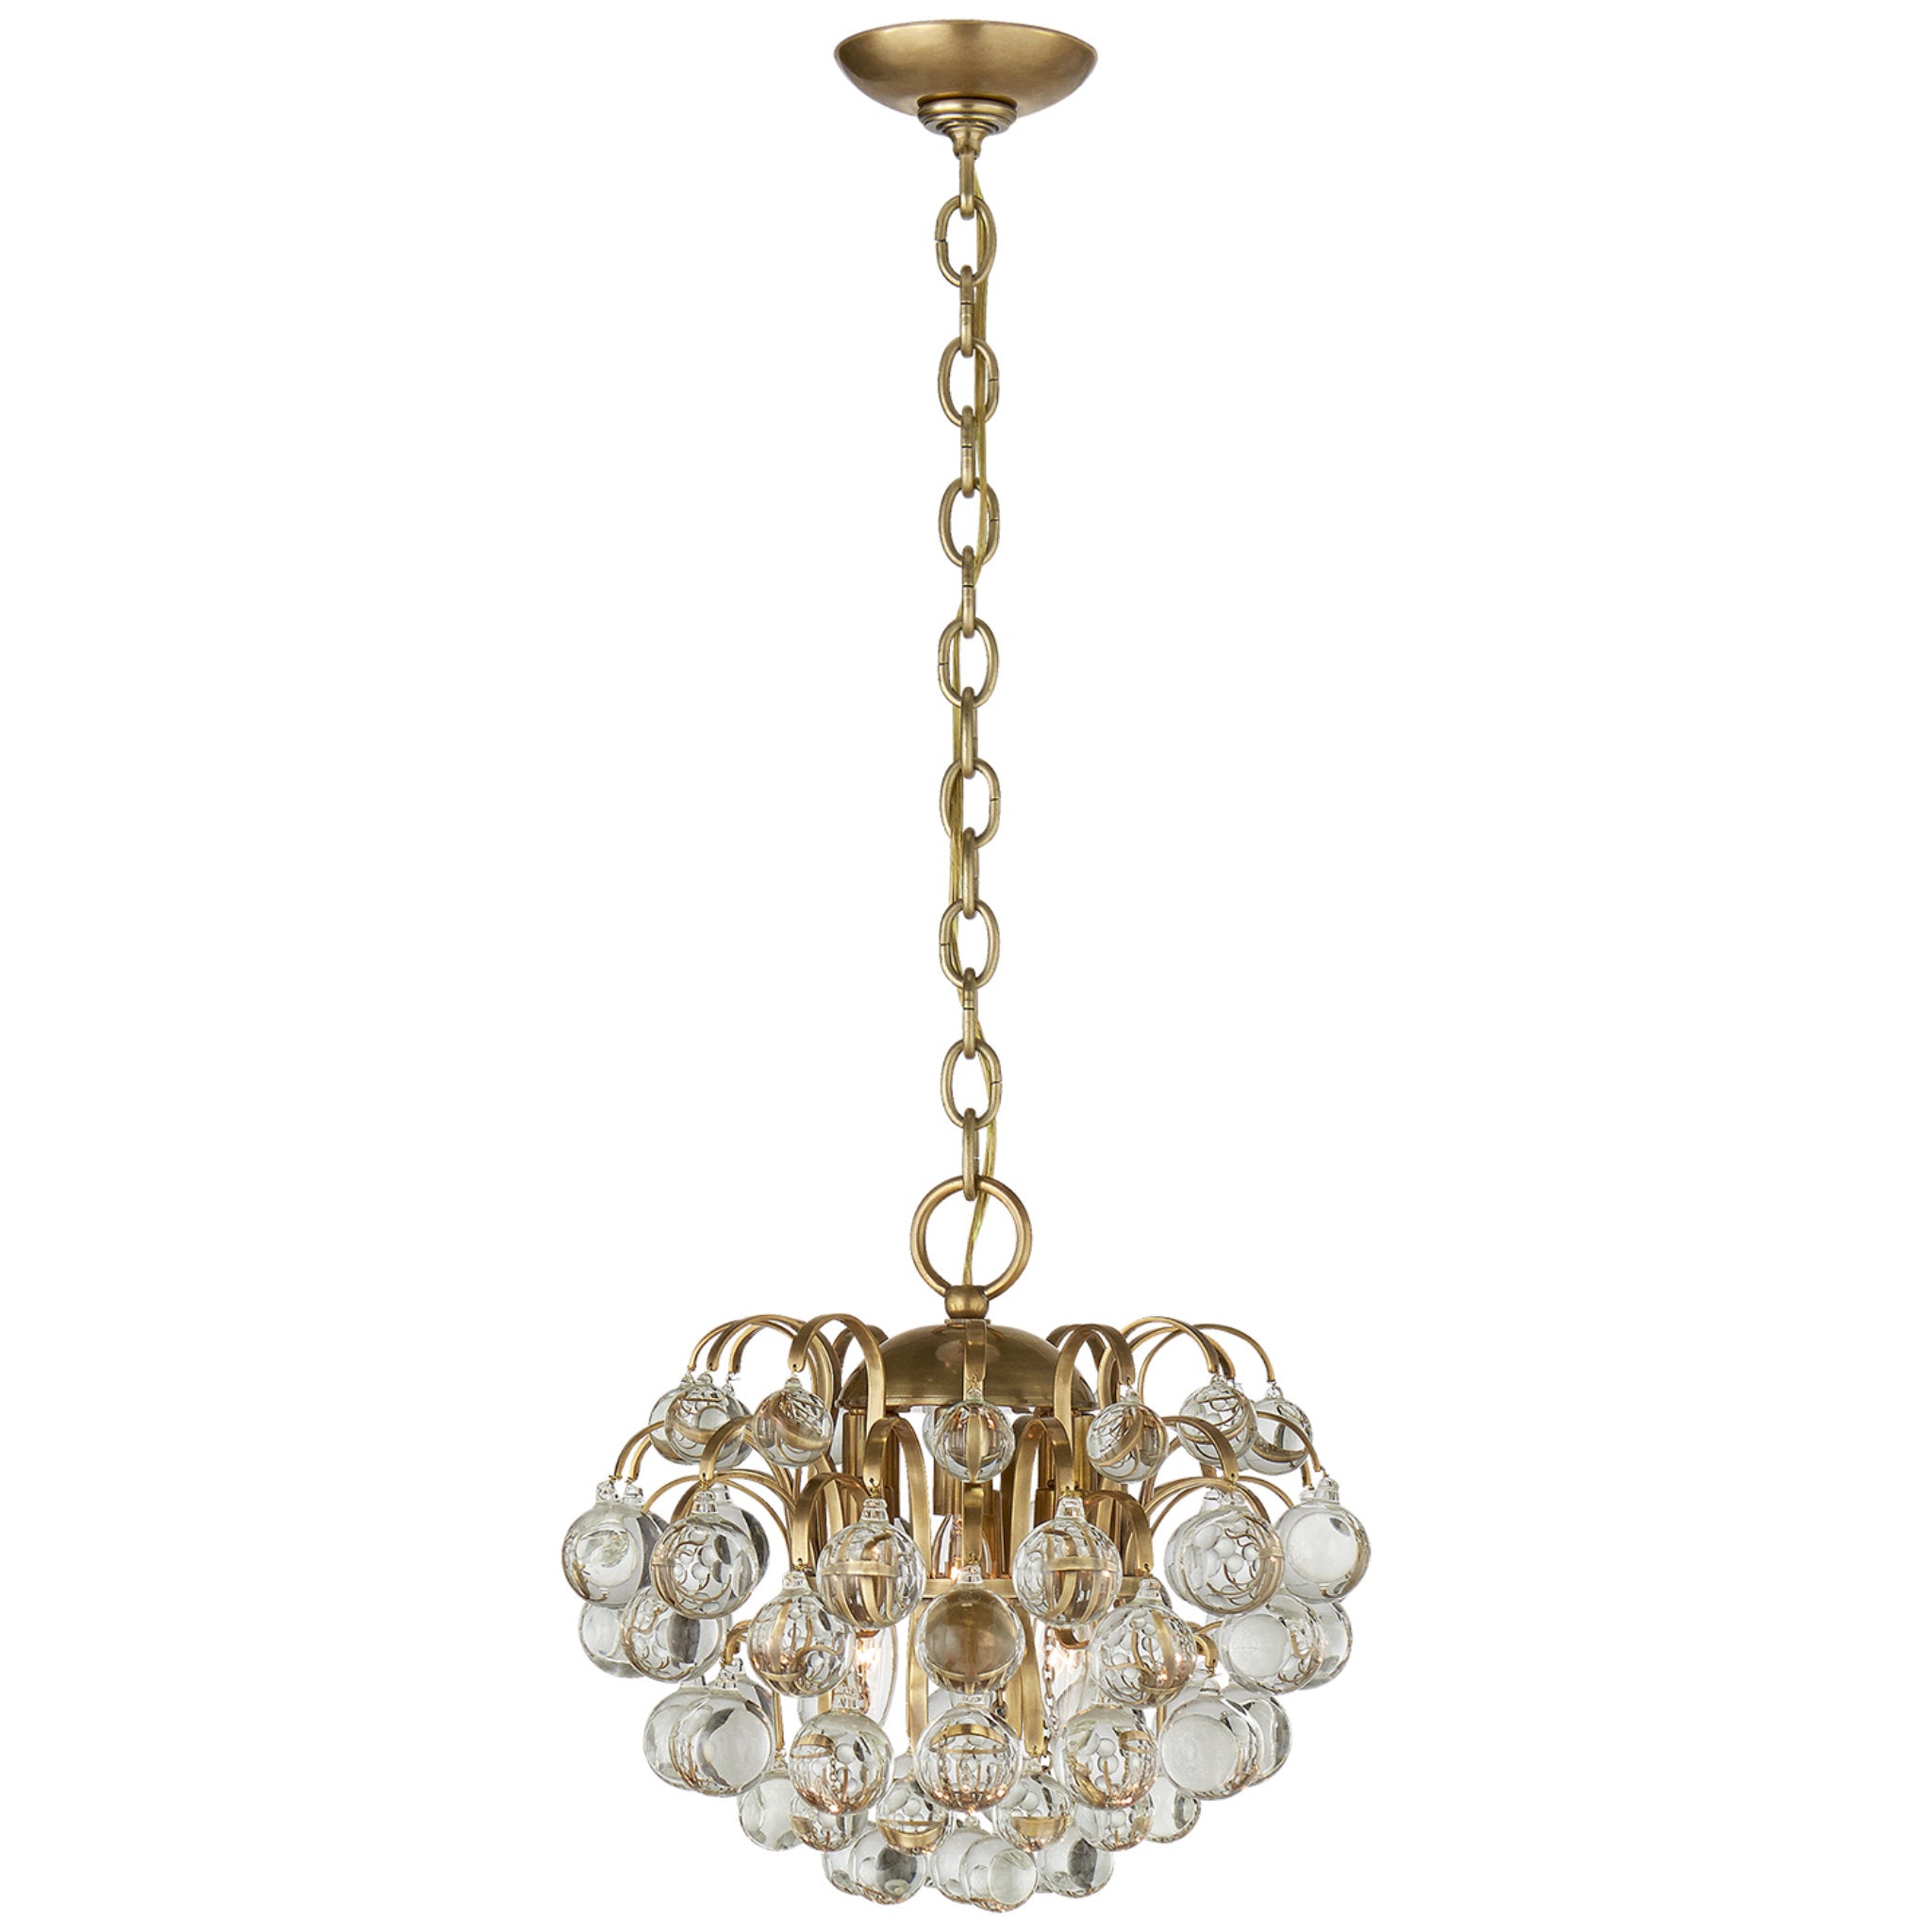 AERIN Bellvale Small Chandelier in Hand-Rubbed Antique Brass with Crystal